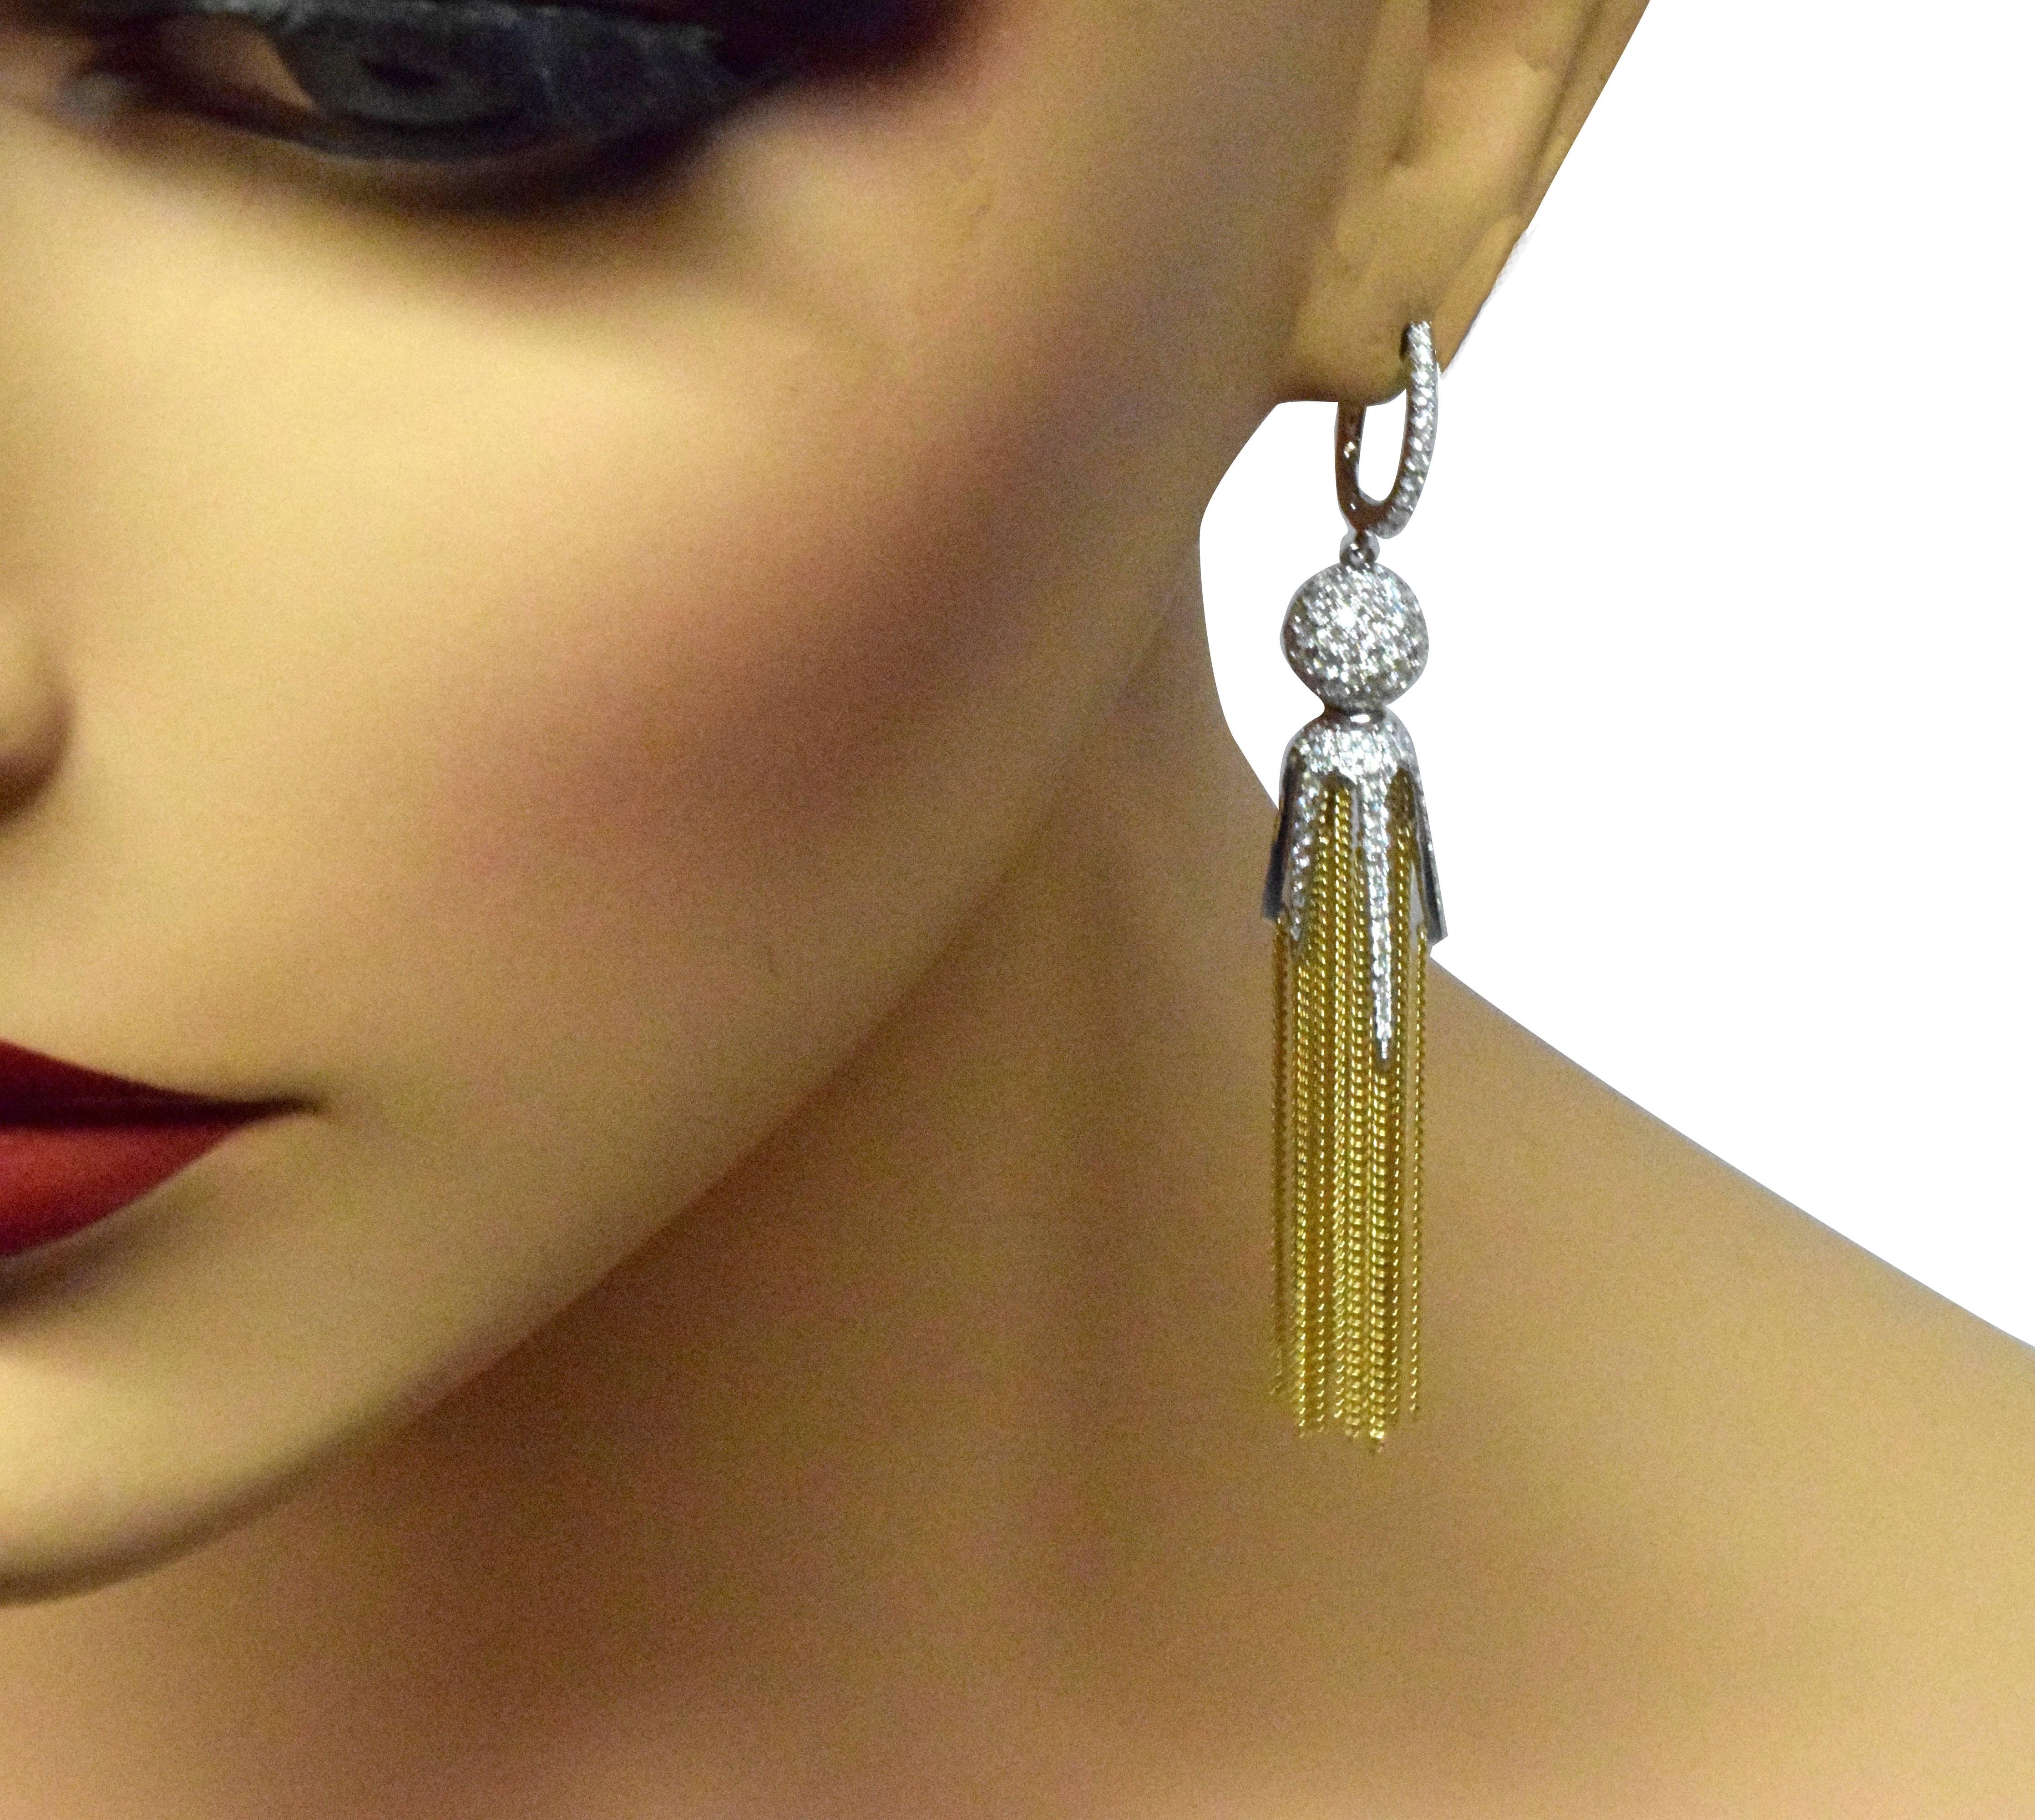 Type: Tassel Earrings
Metal: 18k Yellow Gold & 18k White Gold
Stones: 268 Round Diamonds
Diamond Ball Diameter: 9.24 mm
Approx. Earring Length: 3 inches
Total Carat Weight: 2.76 carat
Total Item Weight (g): 23.0